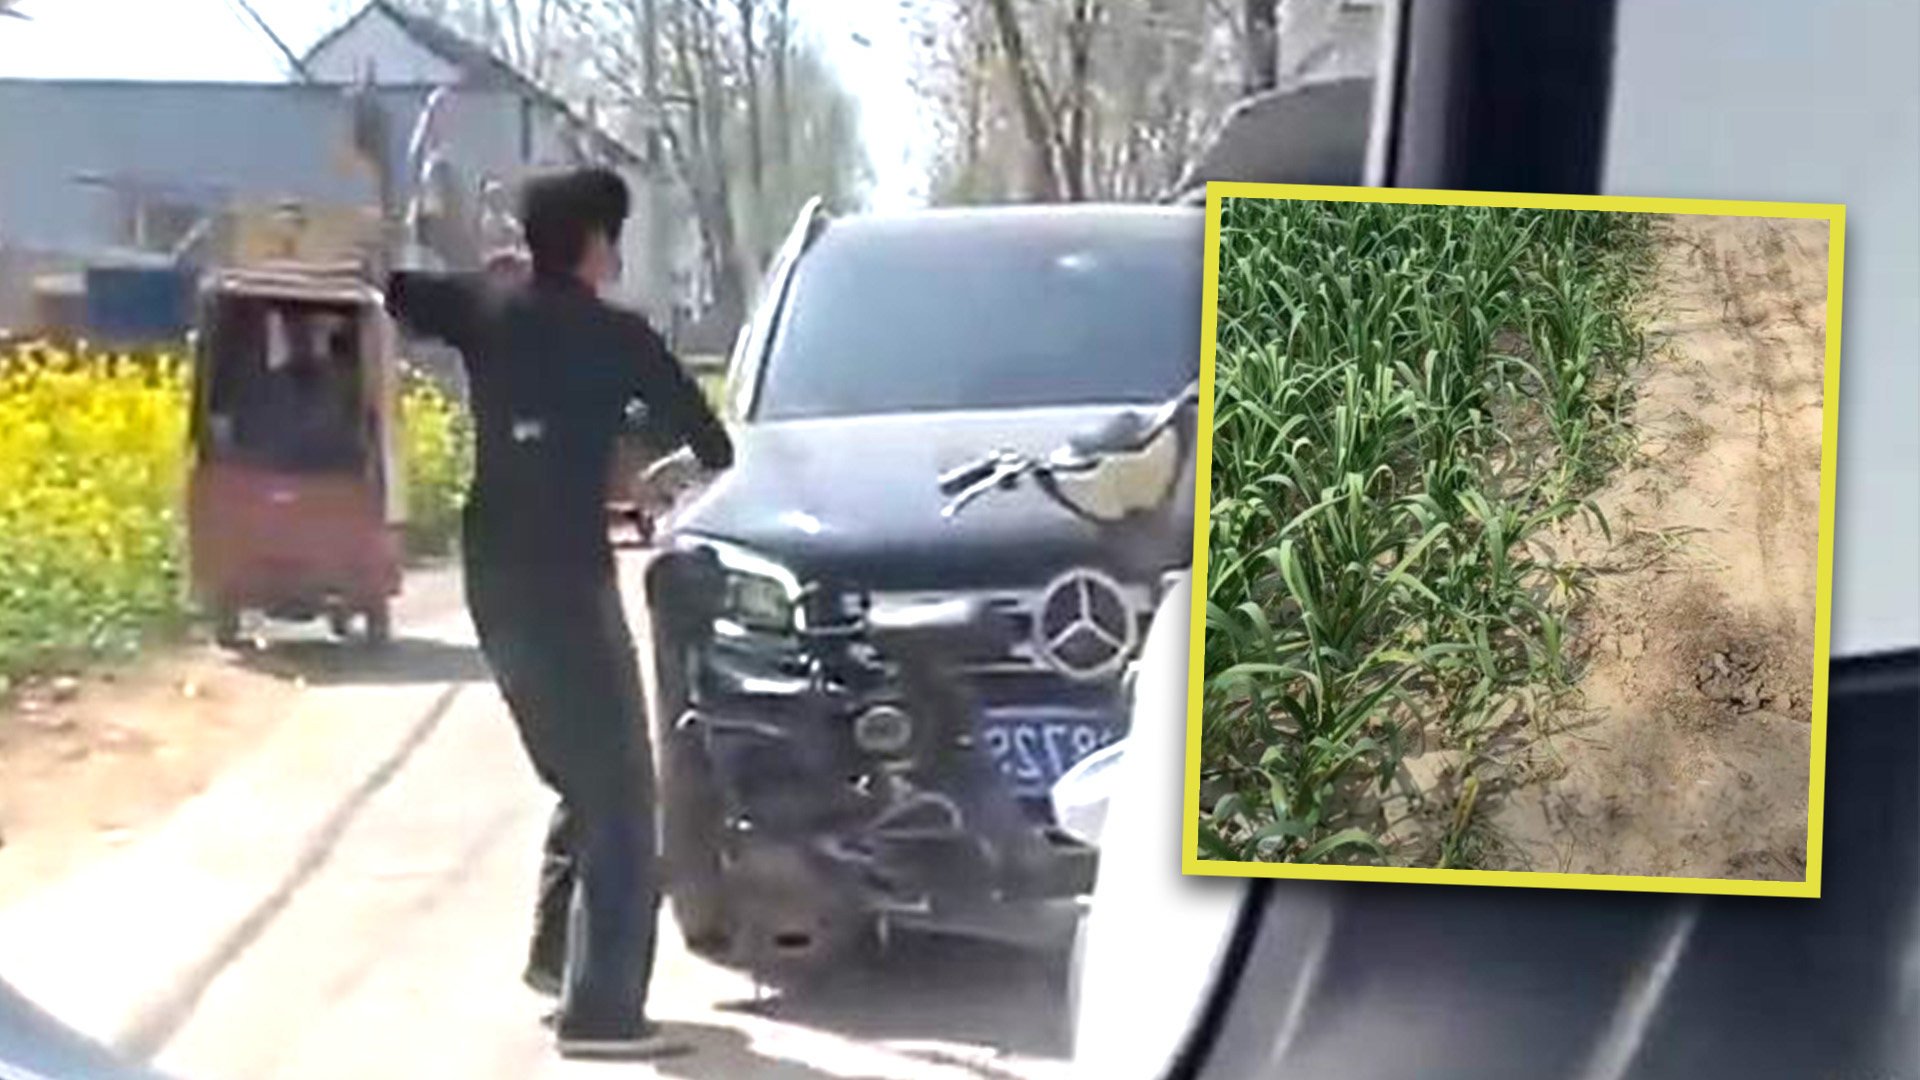 A woman farmer in China went berserk and smashed up a man’s luxury car with a brick after he drove over and crushed some of her carefully planted garlic seedlings on a roadside. Photo: SCMP composite/Douyin